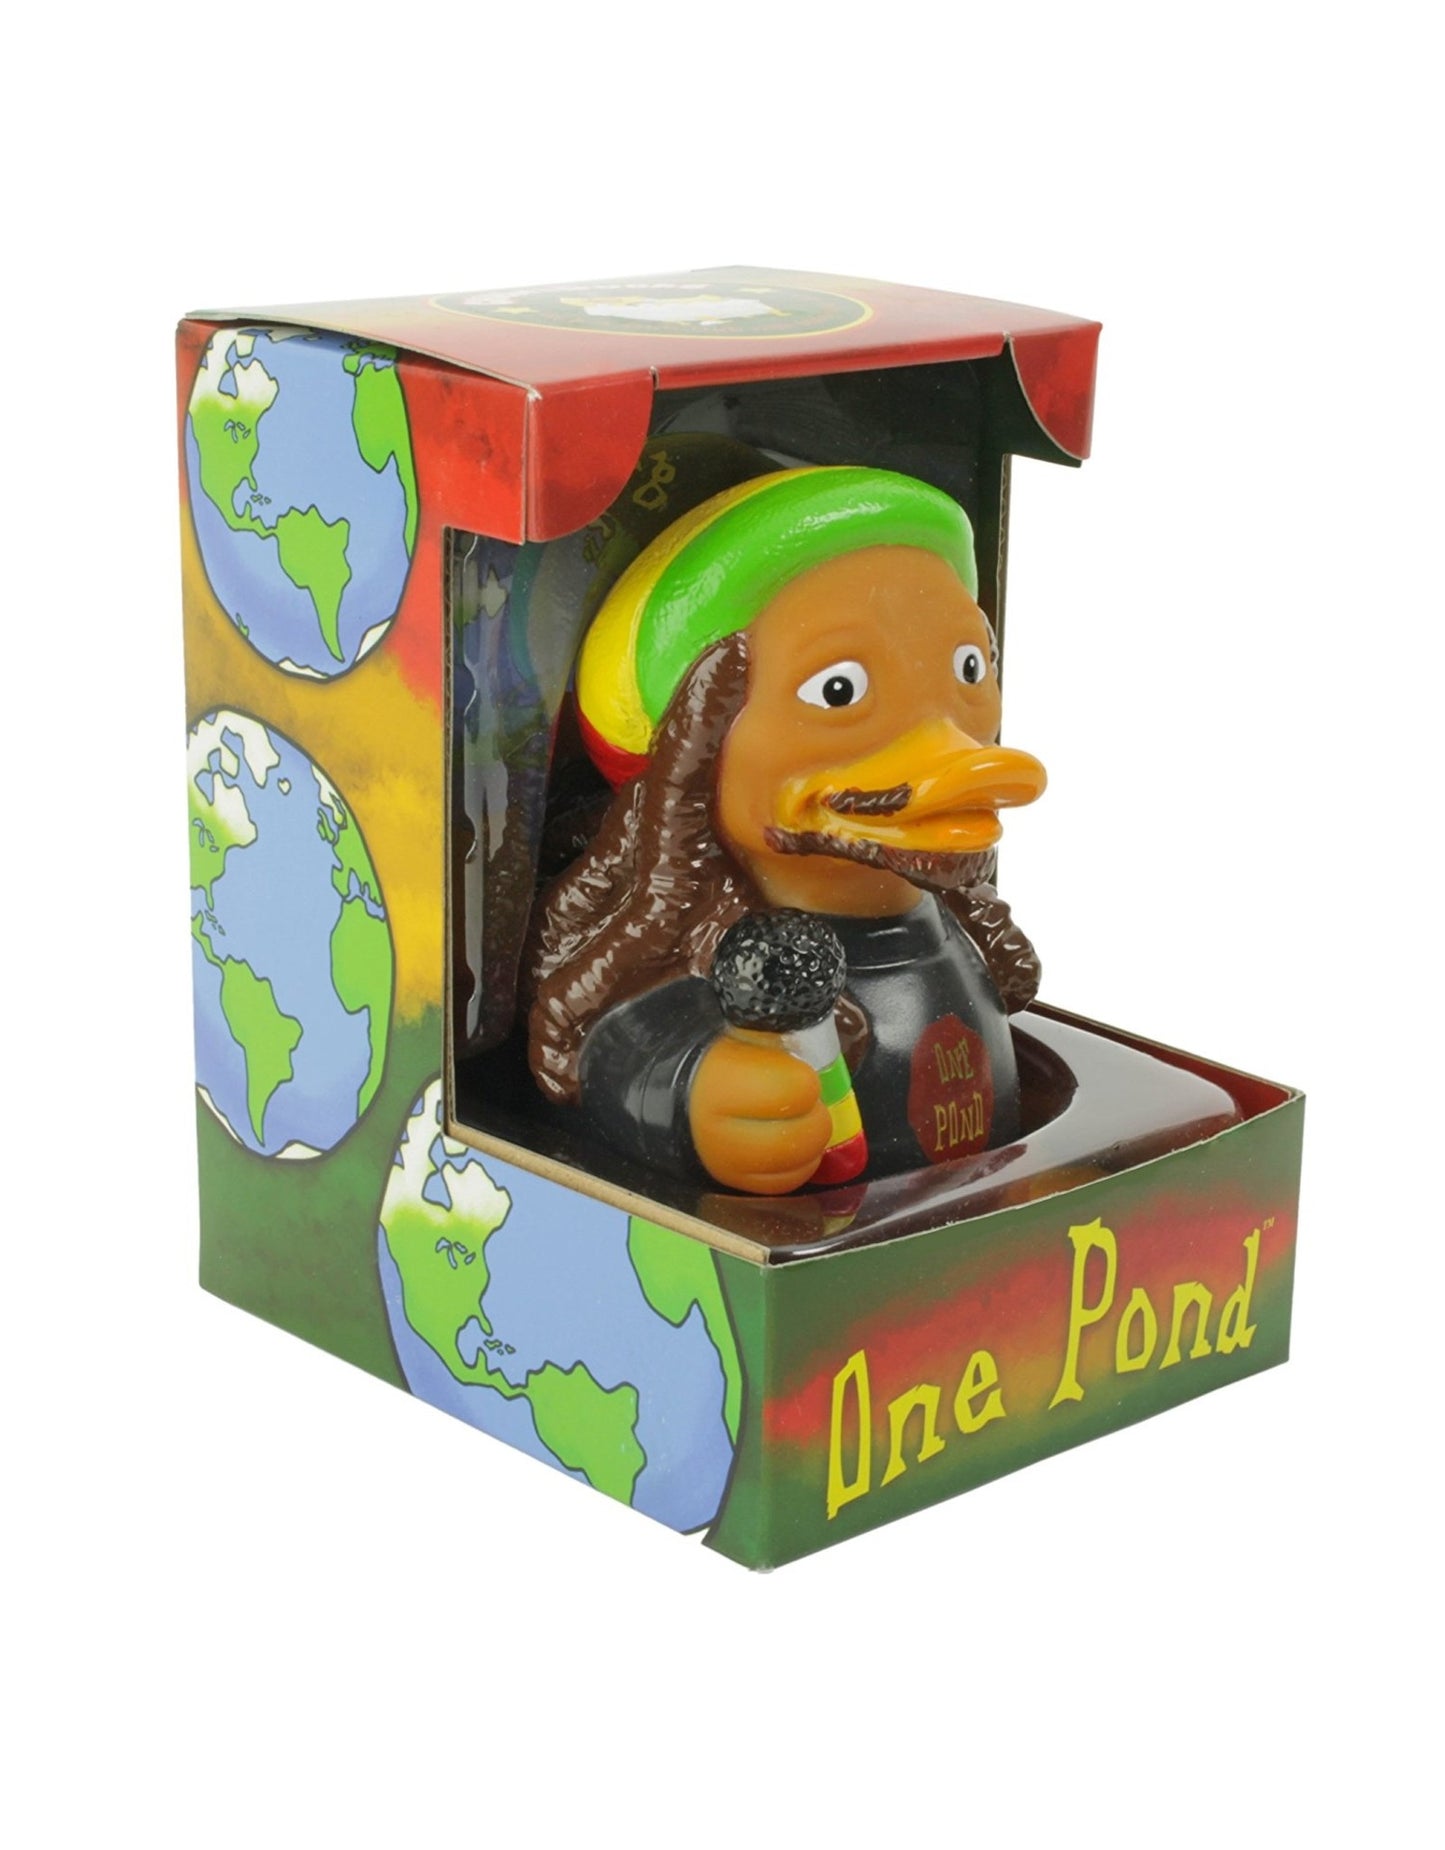 Bob Marley "One Pond" Rubber Duck